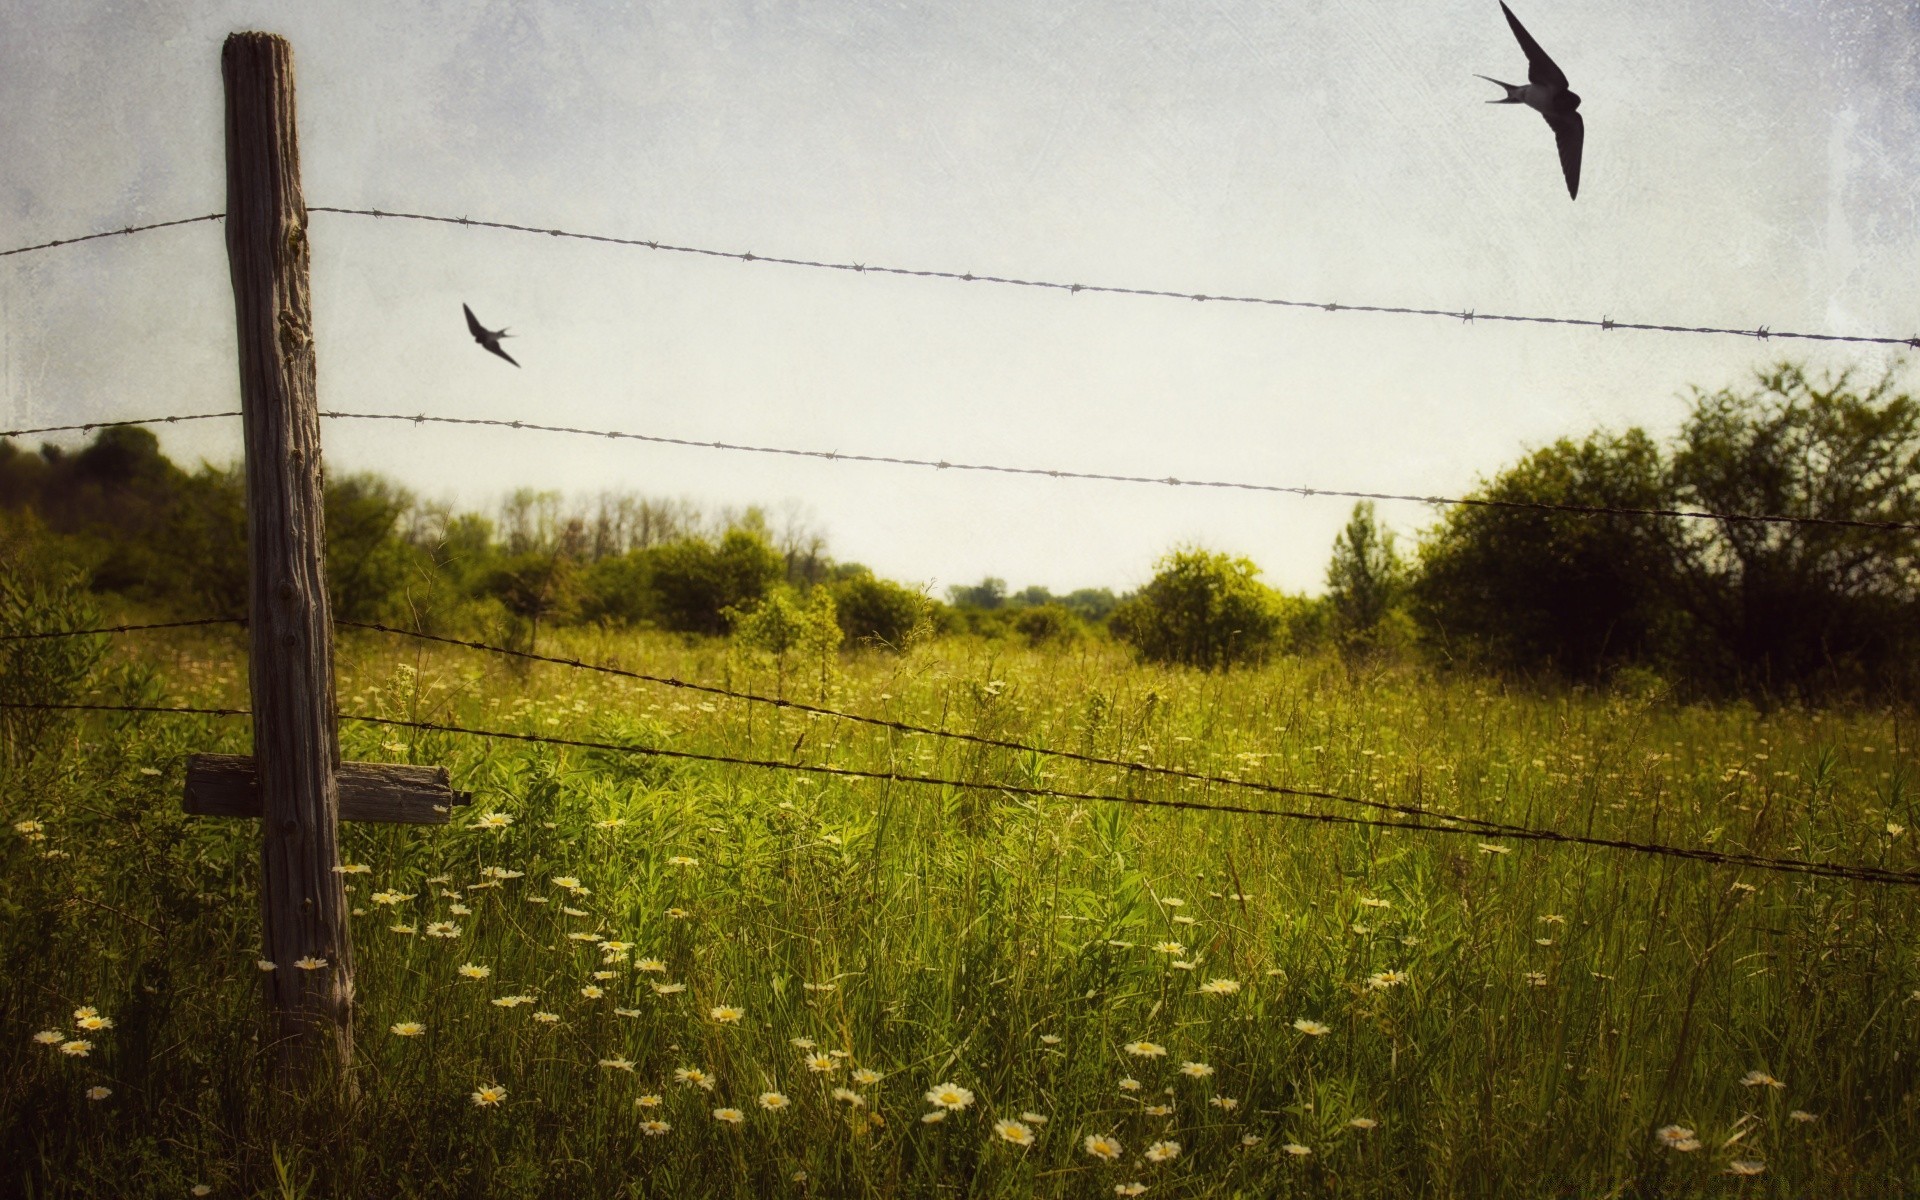 vintage outdoors wire fence bird nature landscape daylight barbed wire cropland sky freedom grass wildlife environment tree military one agriculture